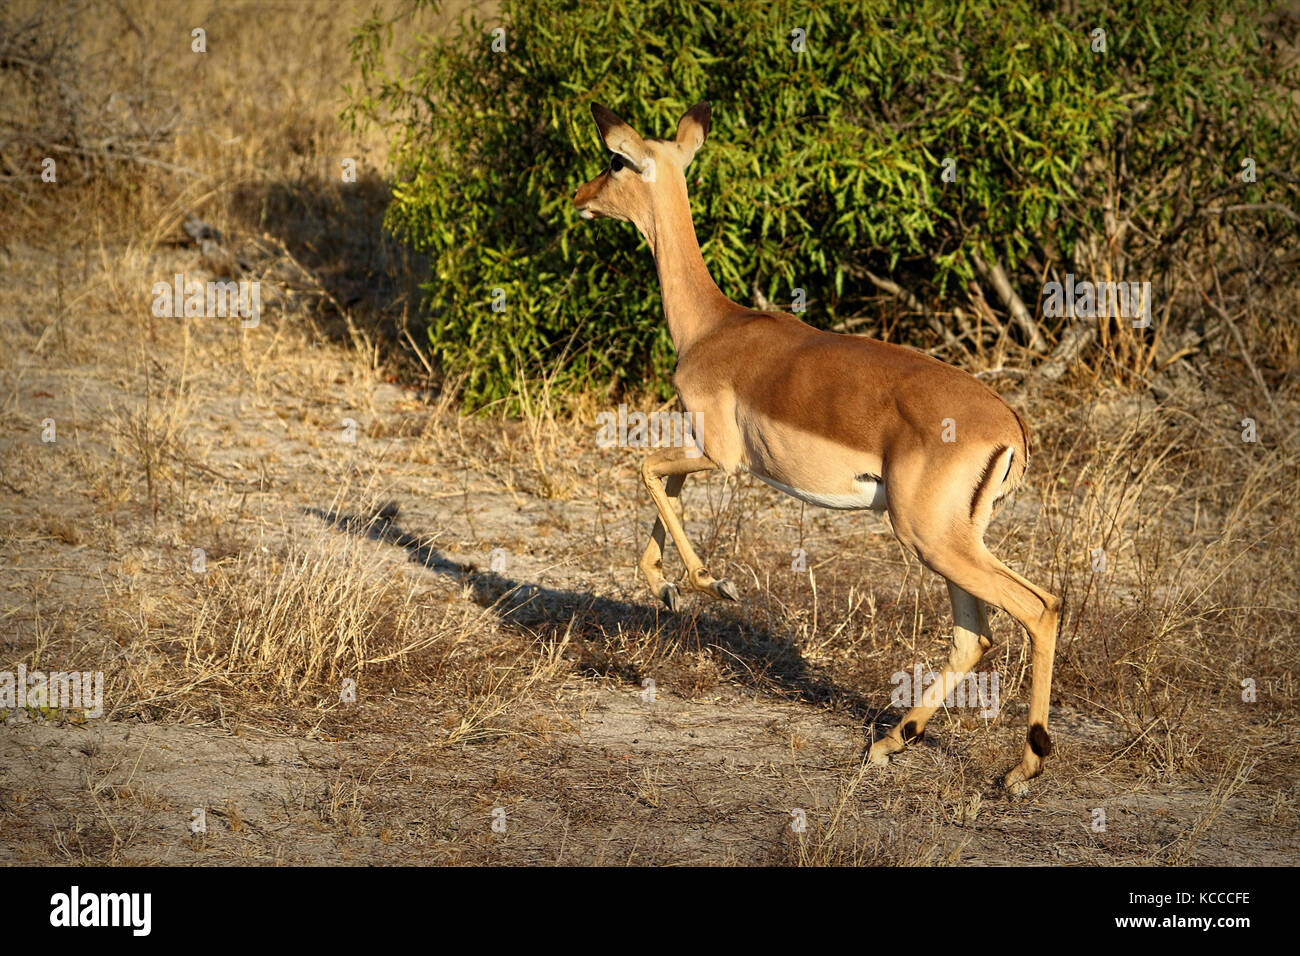 Antelopes in the Kruger National Park, South Africa Stock Photo